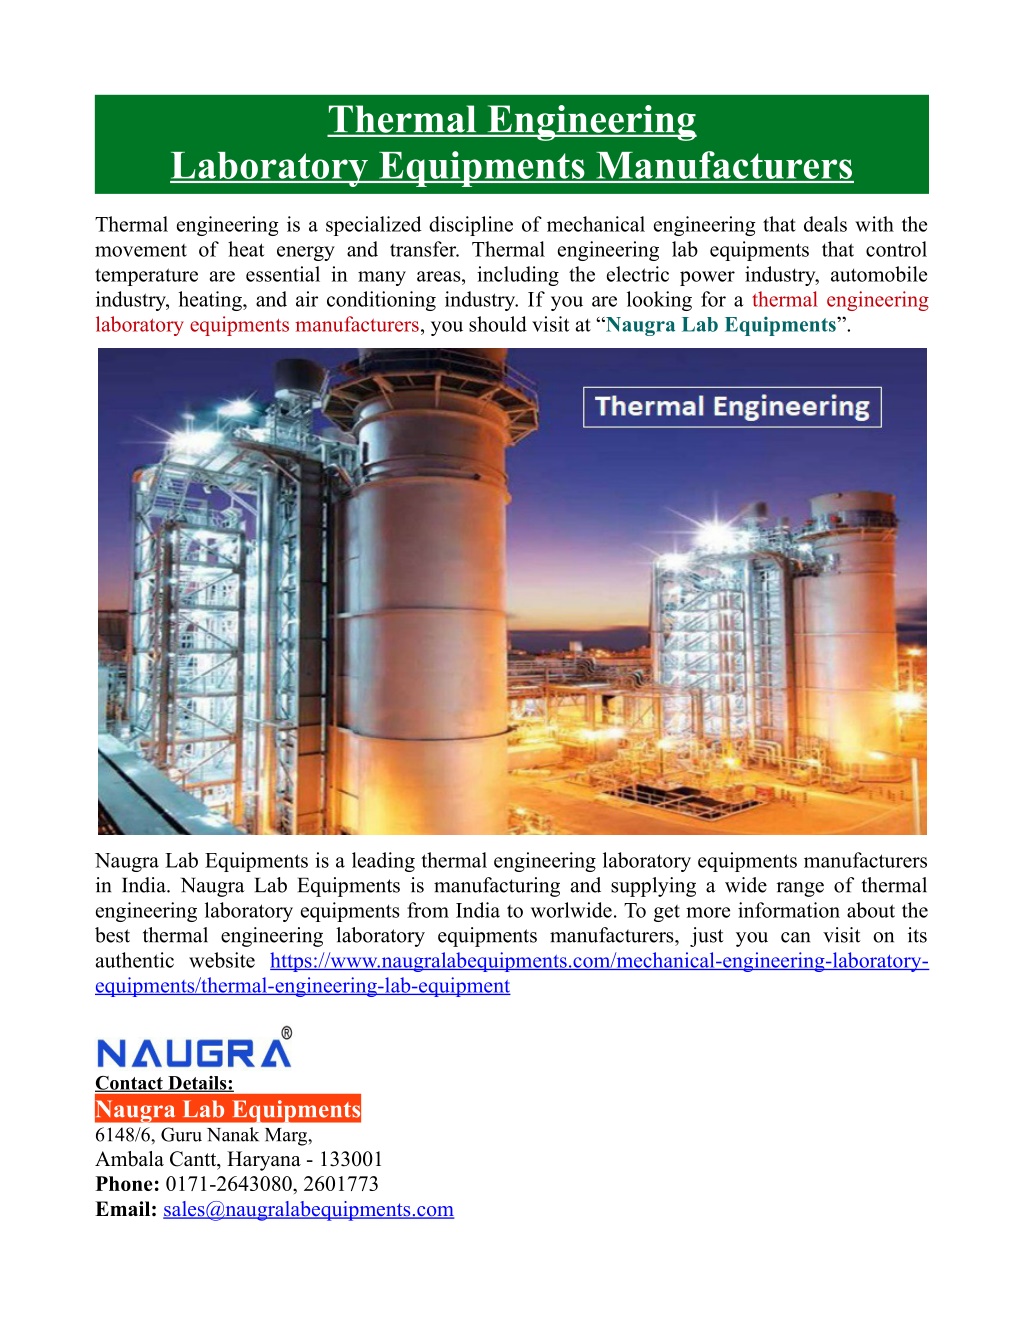 PPT - Thermal Engineering Laboratory Equipments Manufacturers ...